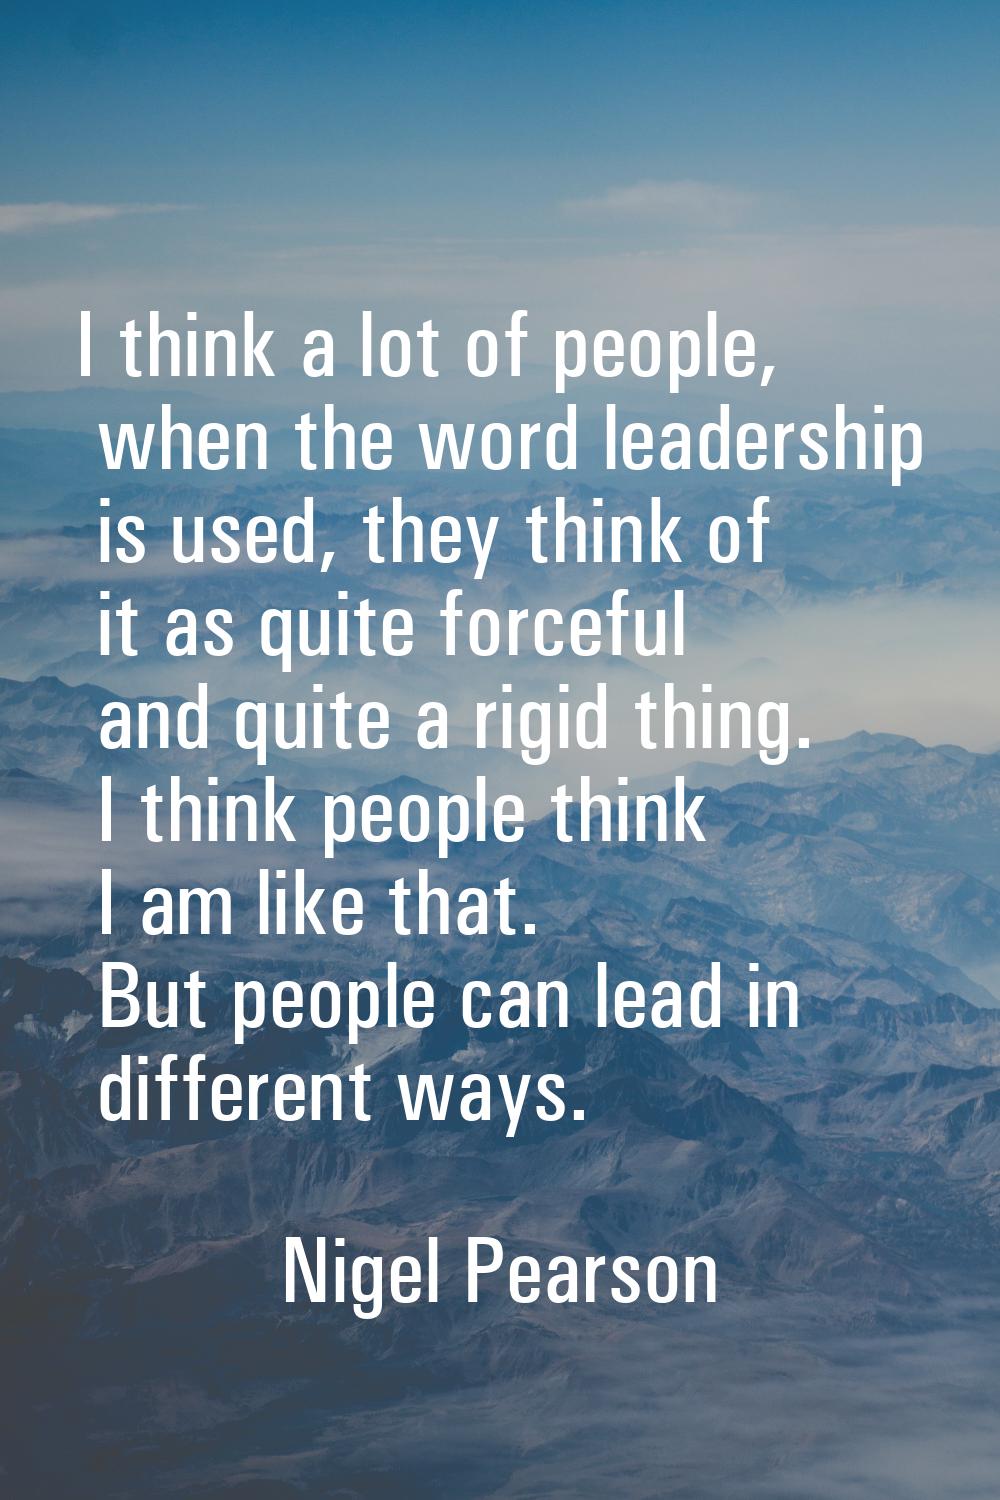 I think a lot of people, when the word leadership is used, they think of it as quite forceful and q